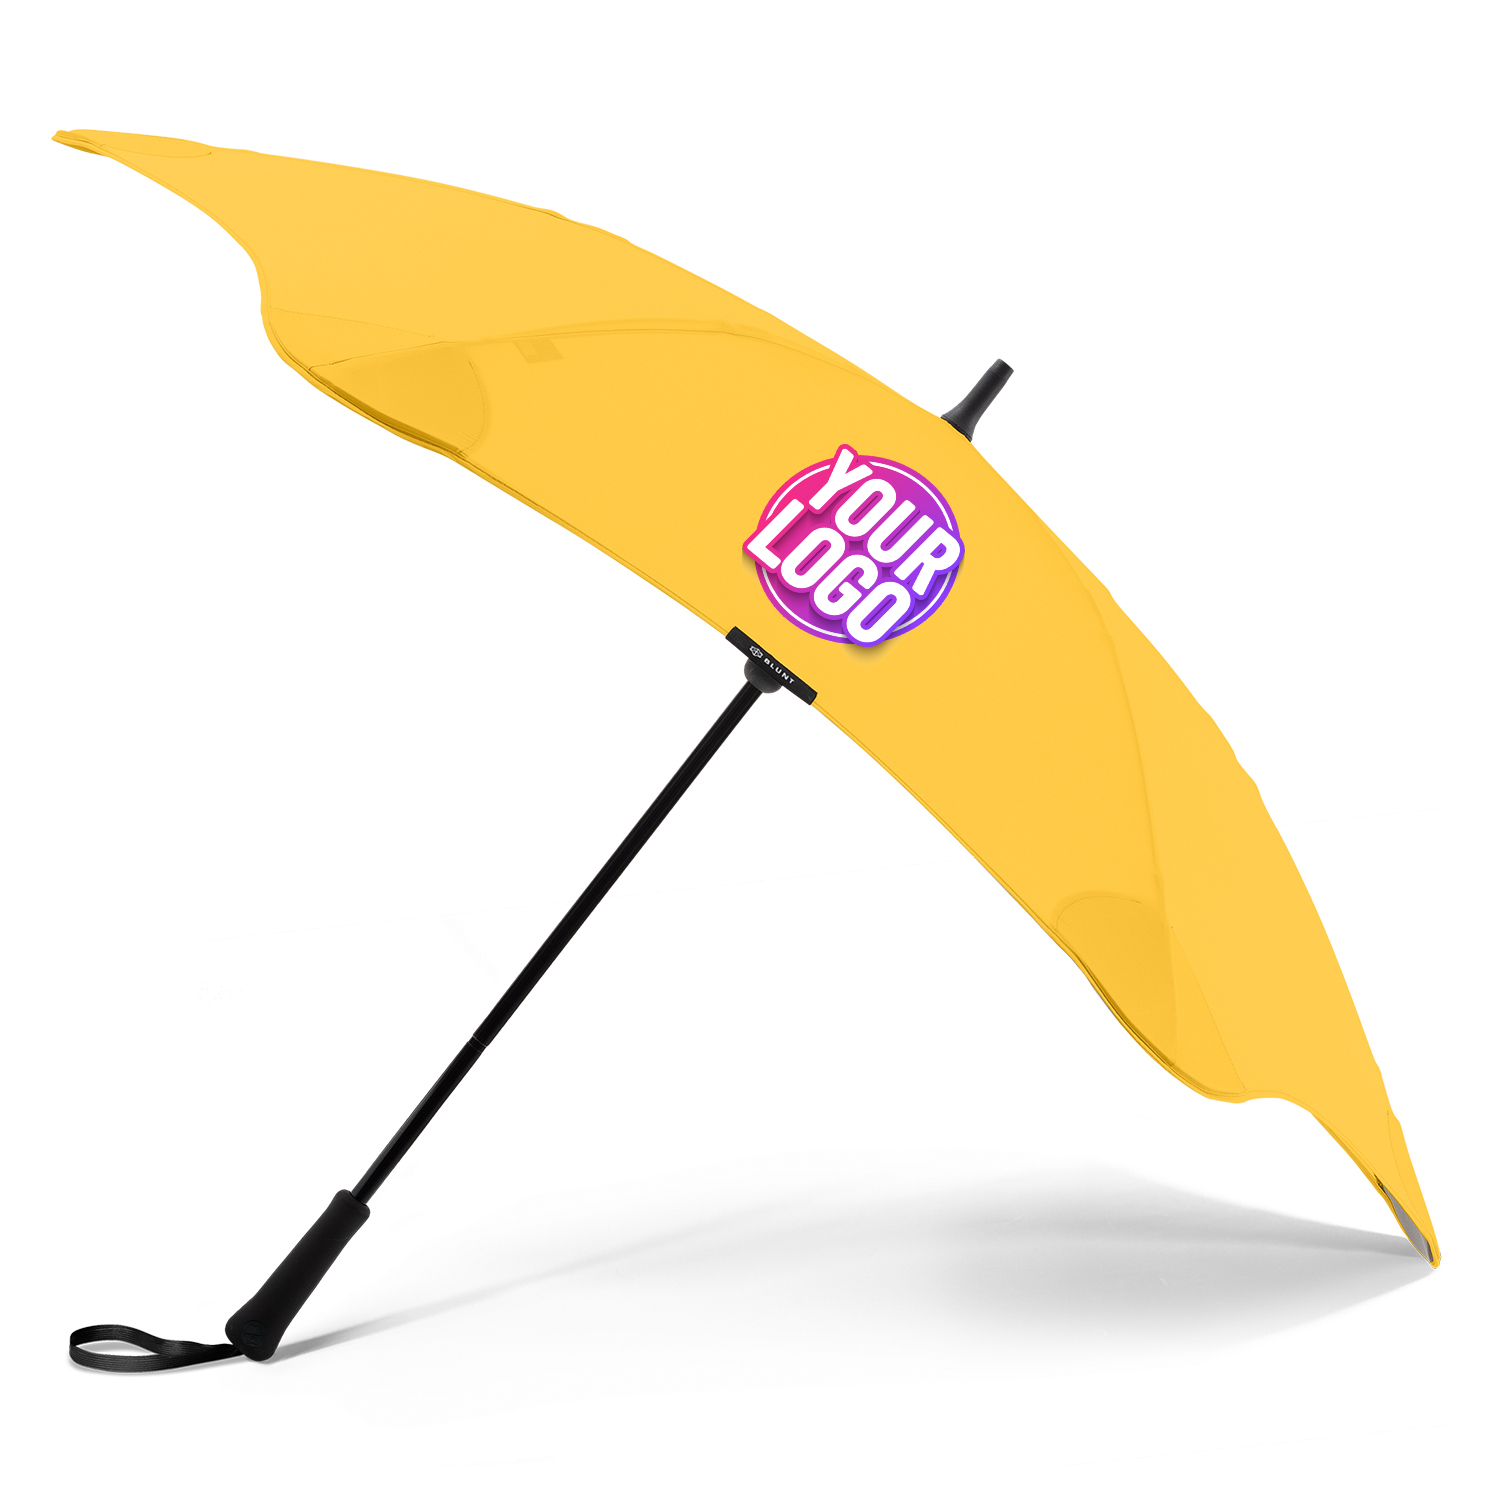 CUSTOM BRANDED - BLUNT®️ Classic Umbrella - The traditional umbrella re-imagined - With Wind Proof Frame